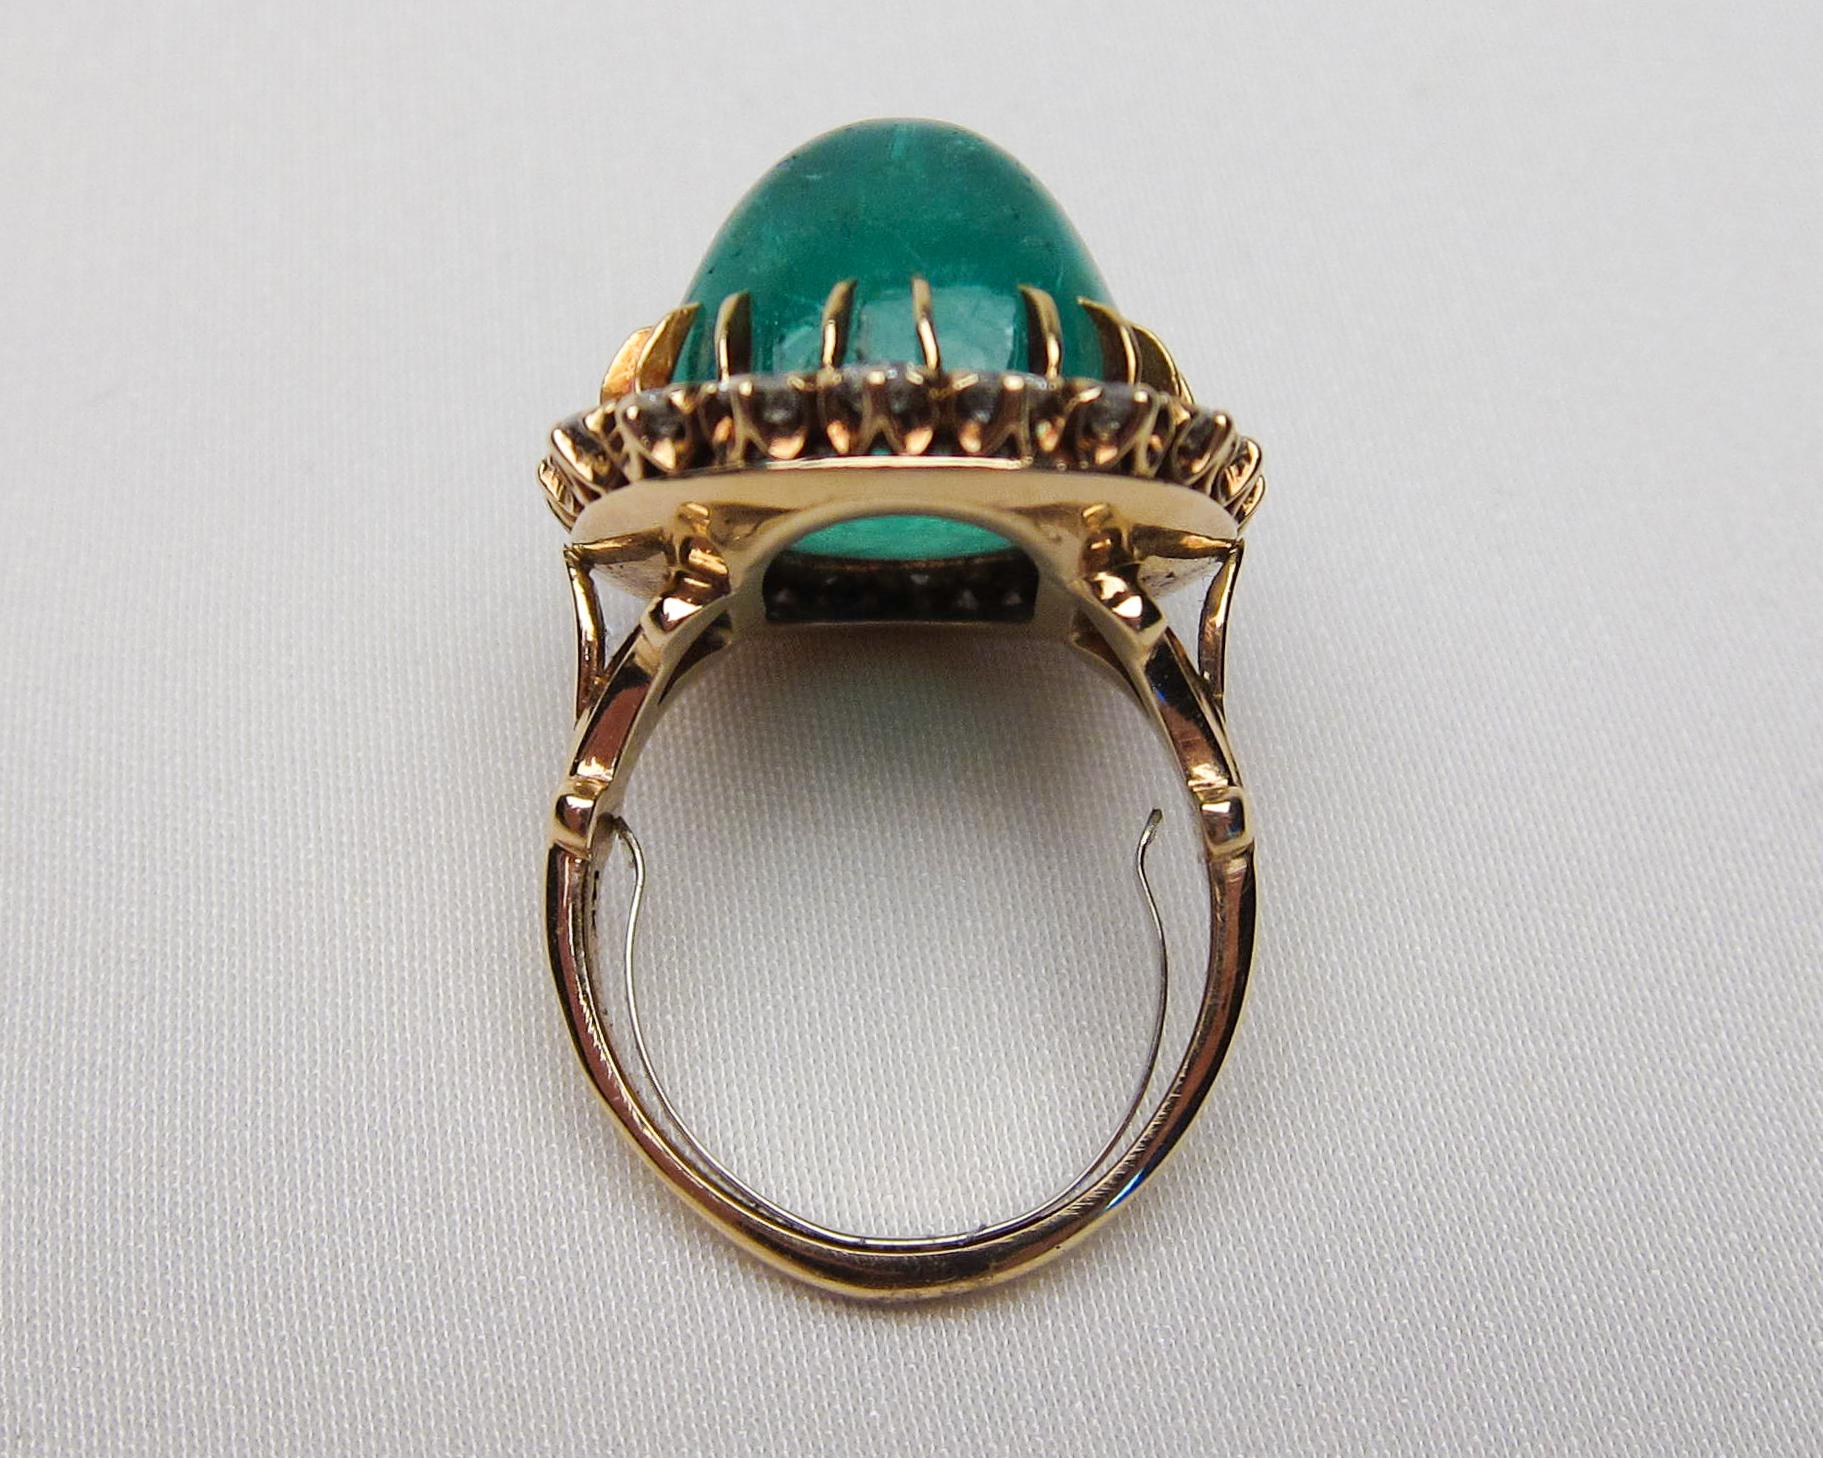 14K Gold 1.60 Ct Diamond and 27.60 Ct Emerald Cabochon Cocktail Ring, Circa 1940 For Sale 2